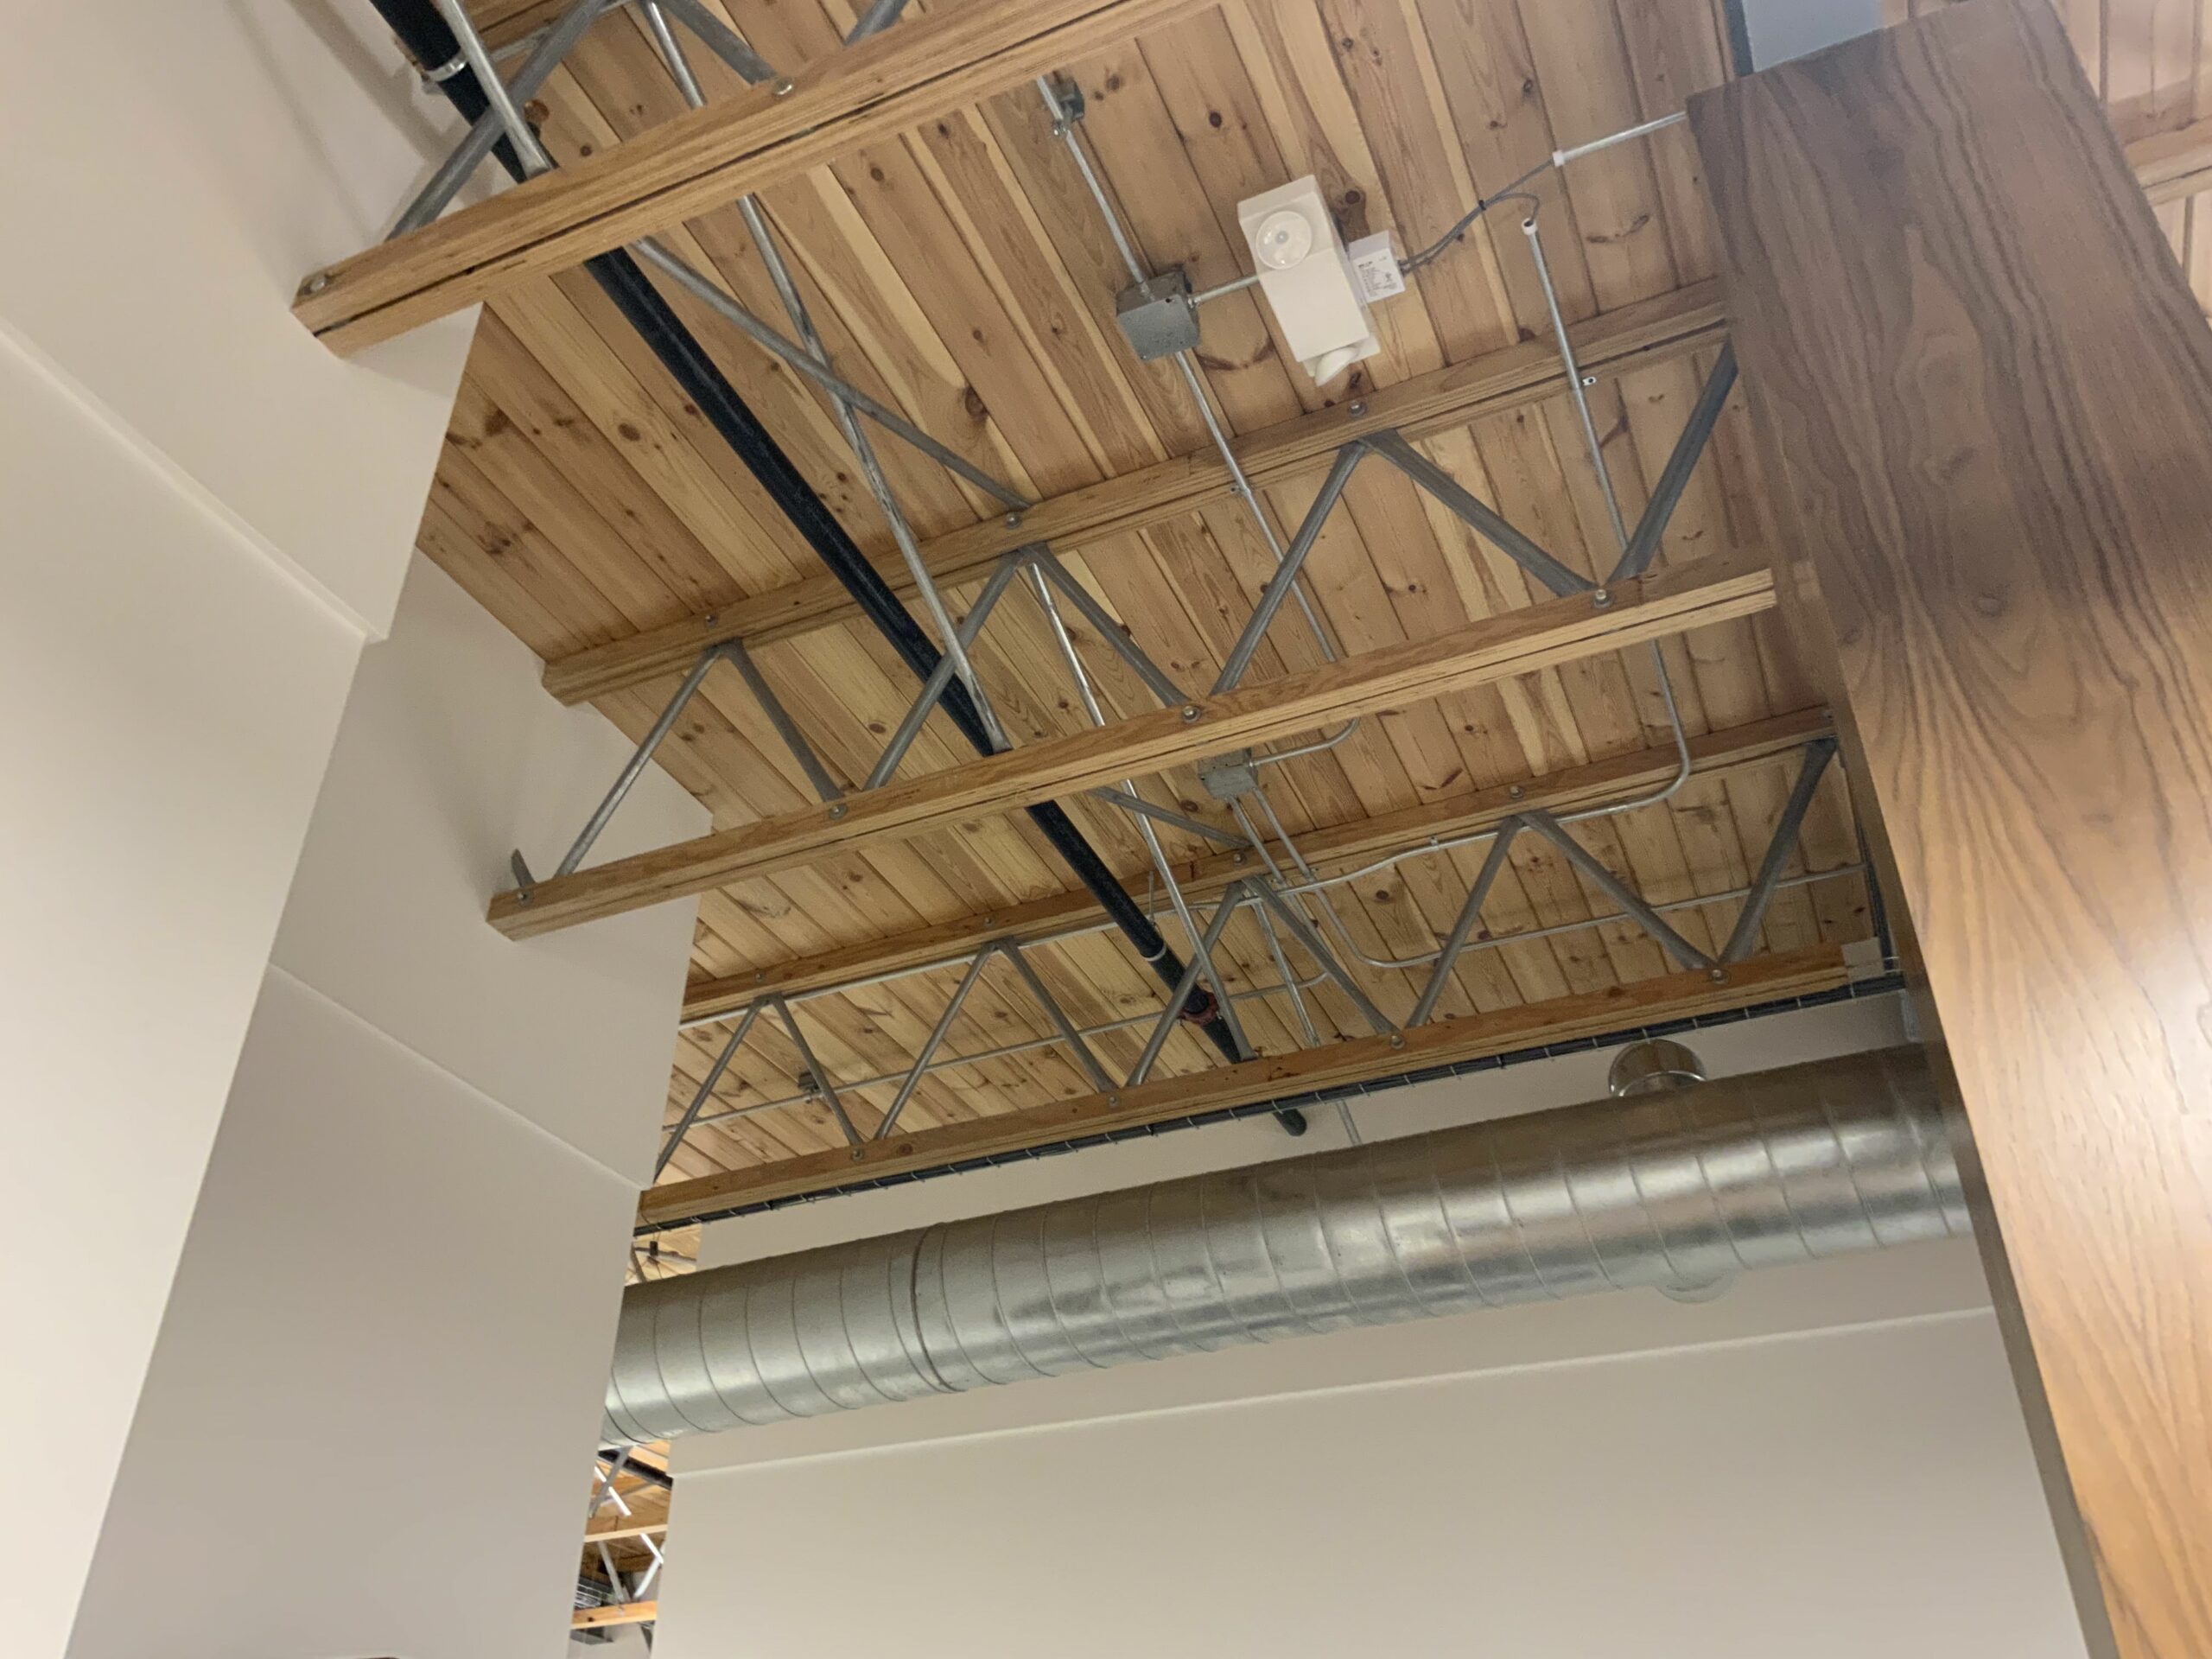 The ceiling of the Crahen Office Building. Clean wood panels, rafters, and exposed ductwork can be seen.